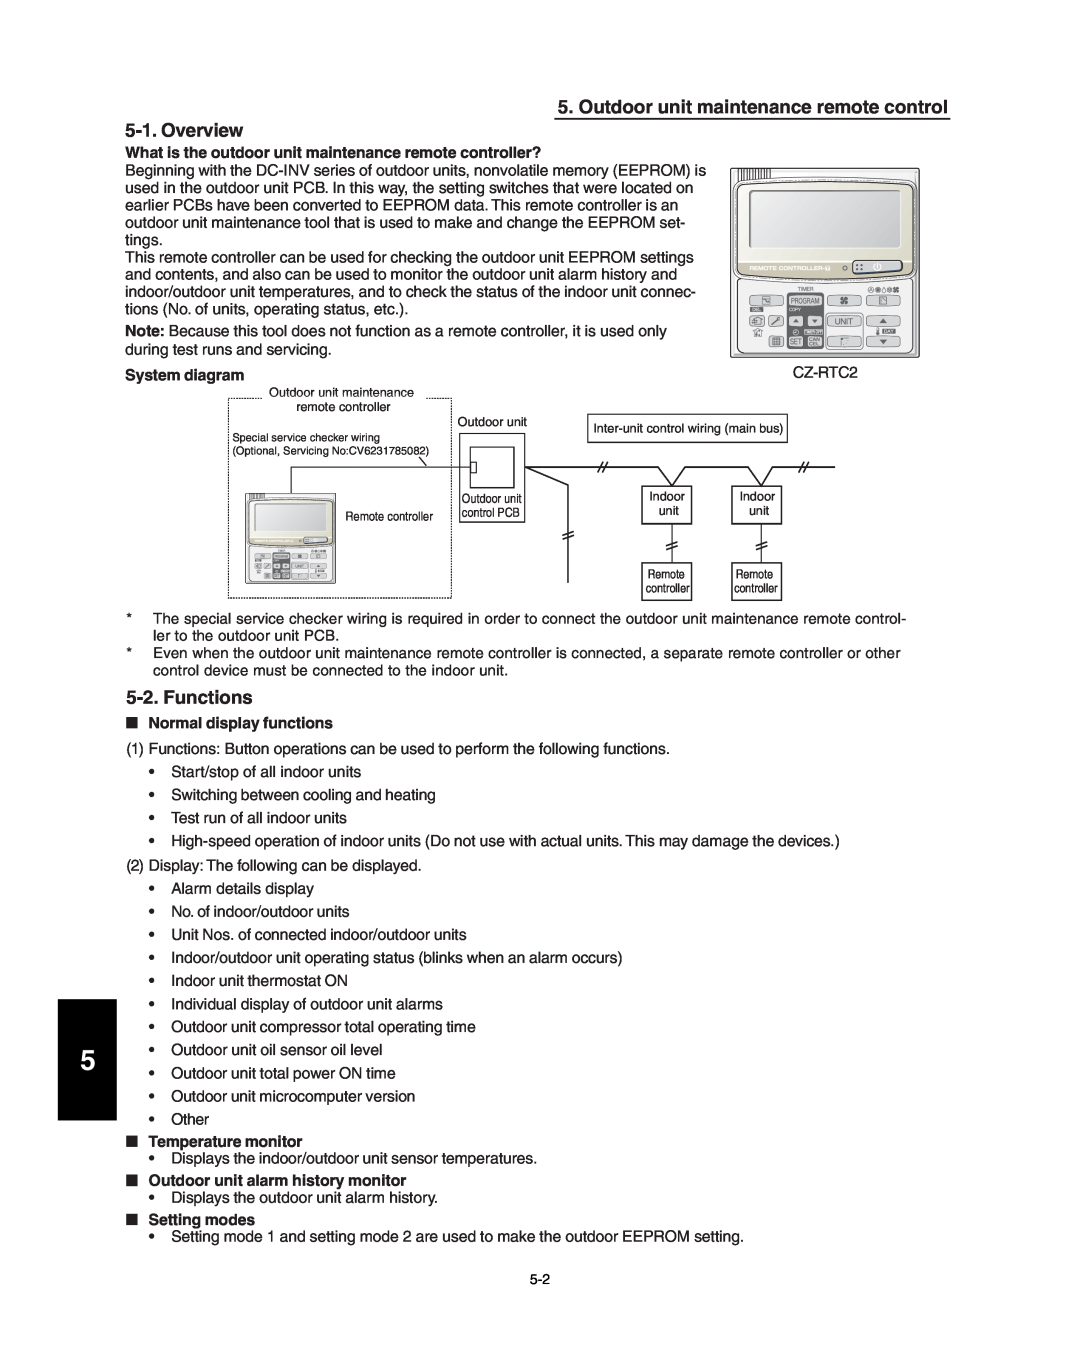 Panasonic R410A Outdoor unit maintenance remote control, Overview, Functions, System diagram, Normal display functions 